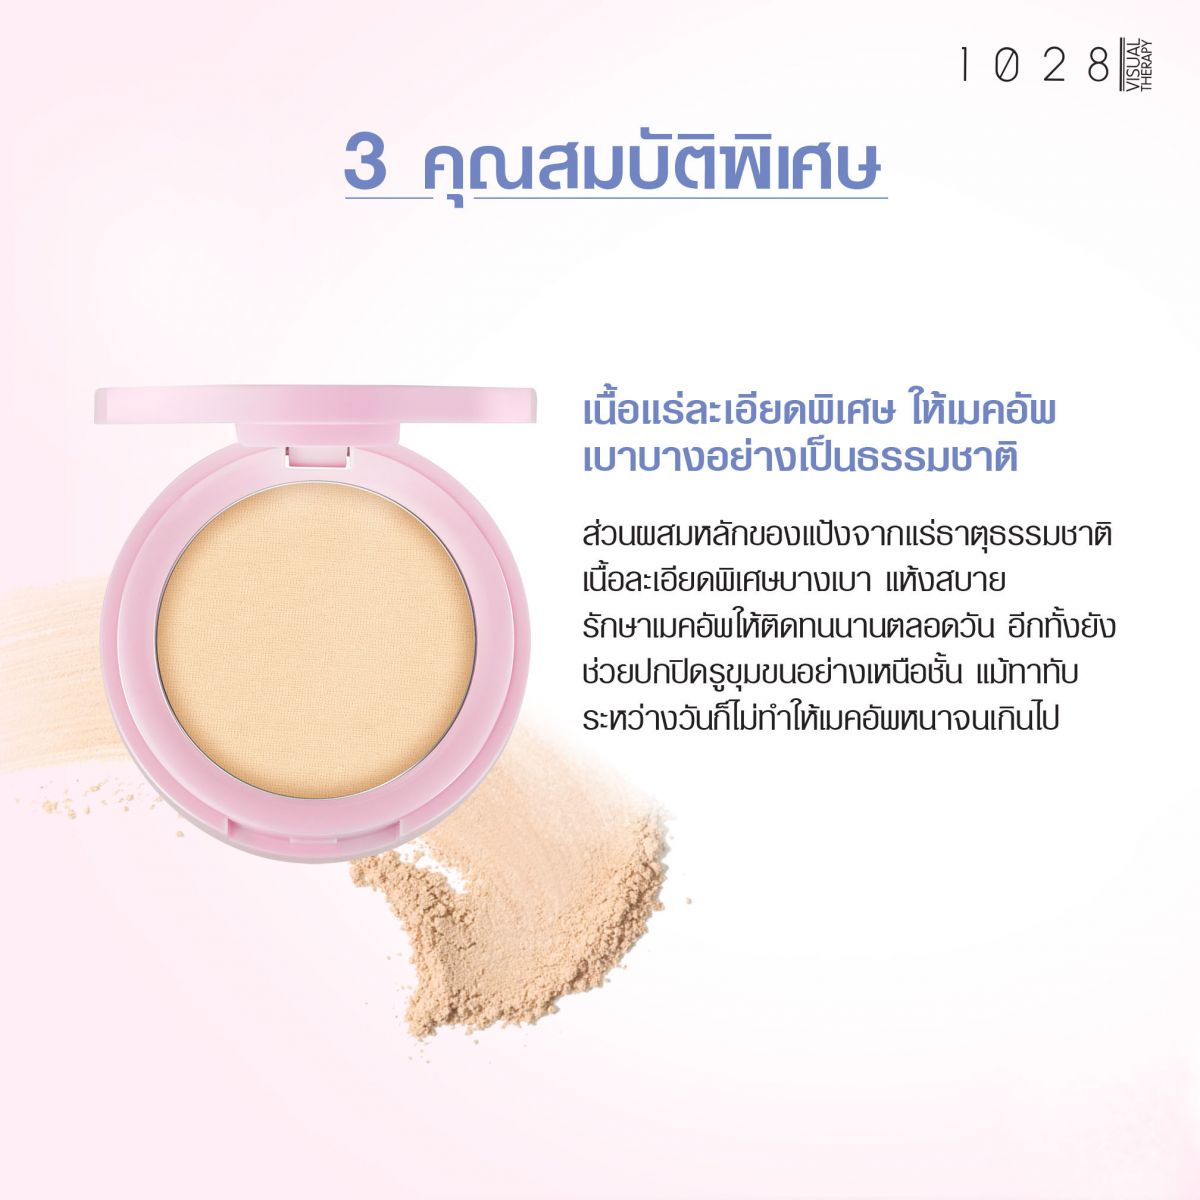 1028 VISUAL THERAPY,Ultimate Oil Control Powder,แป้งคุมมัน